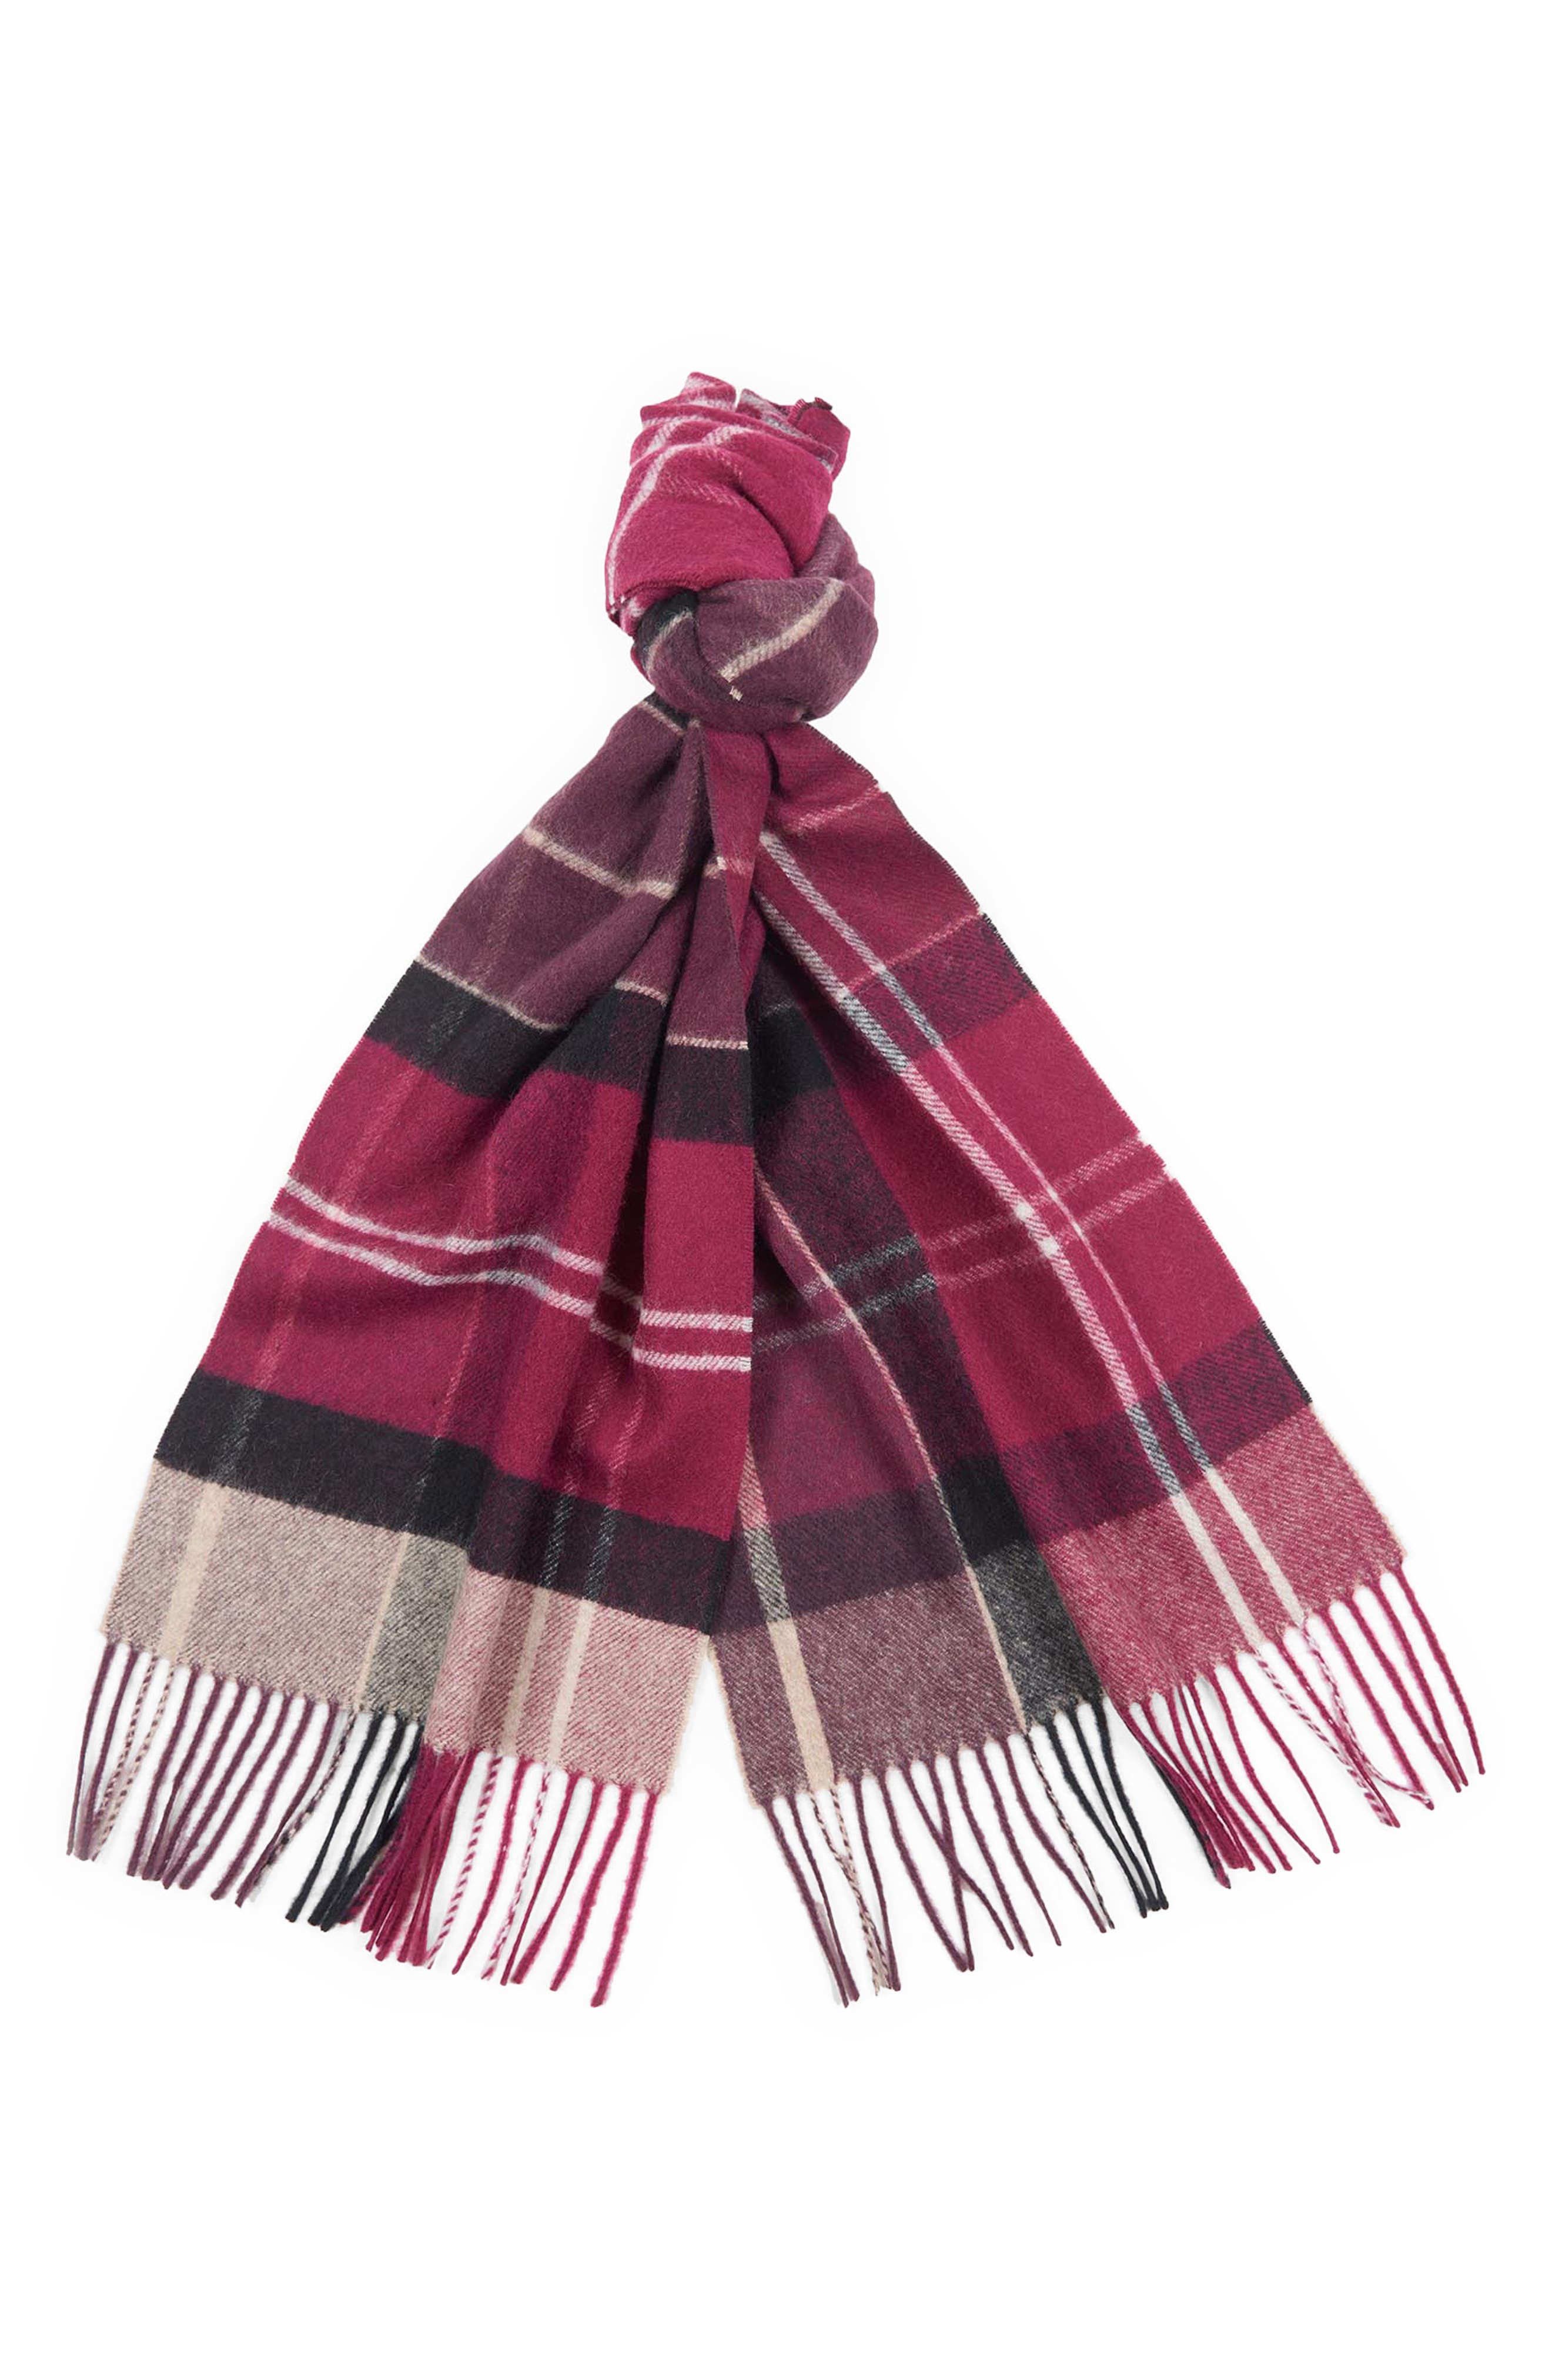 Present for her Vintage wool long scarf with fringe \\ Brown white blue tartan plaid wool scarf Winter unisex scarf shawl